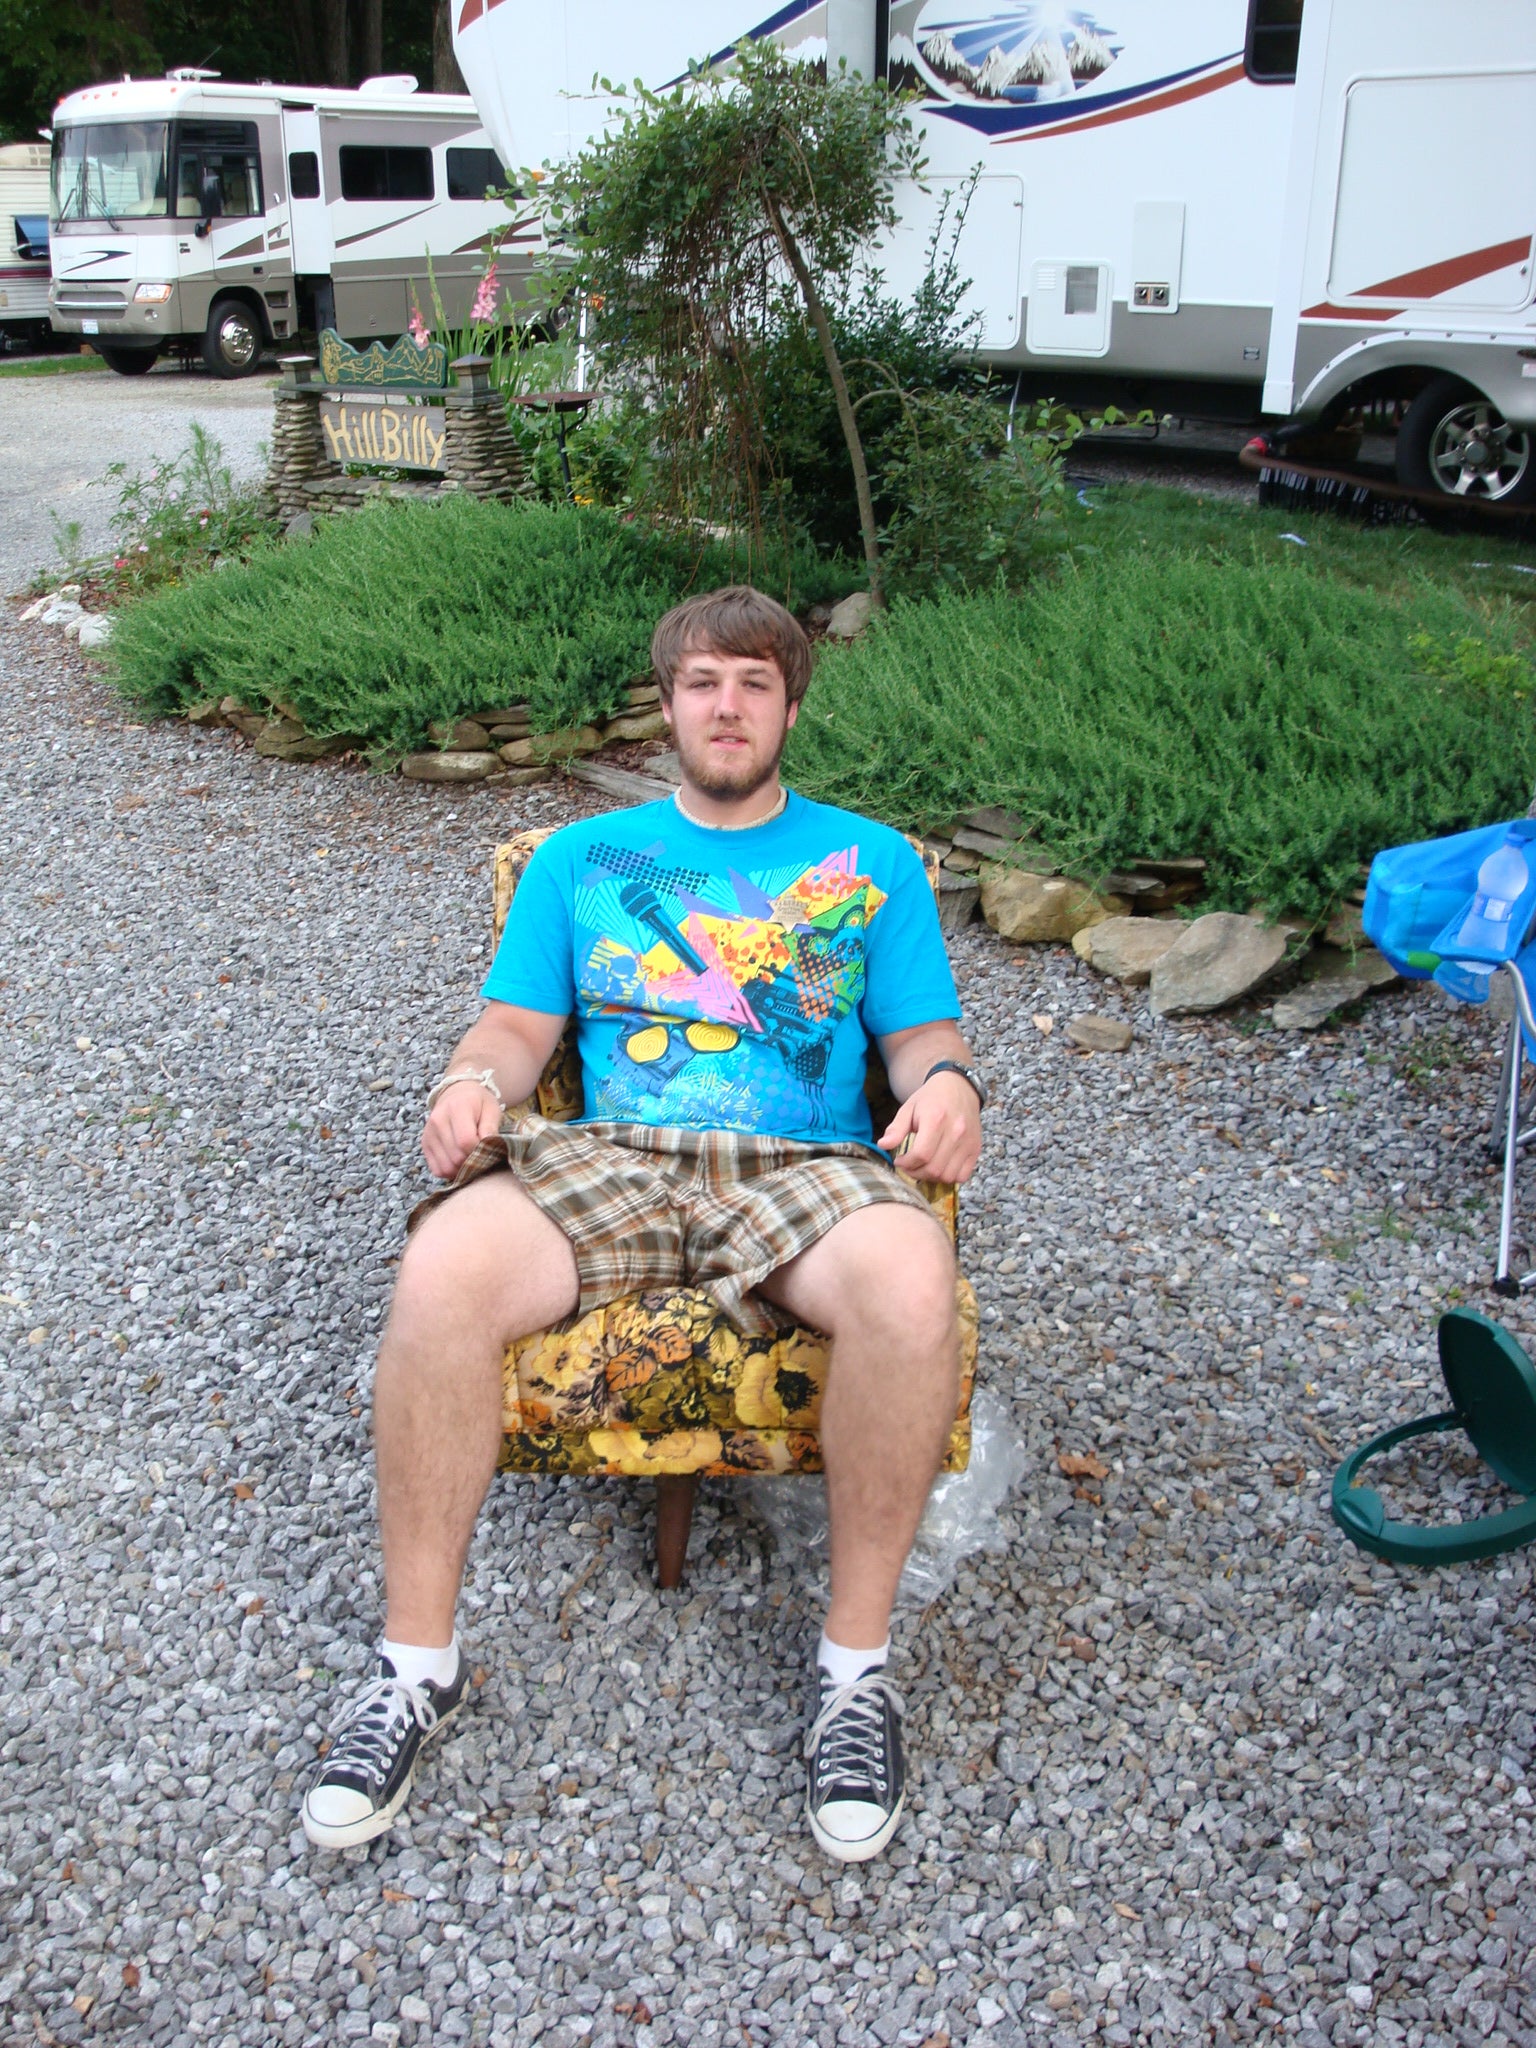 My son is relaxing in his easy chair at the campground.